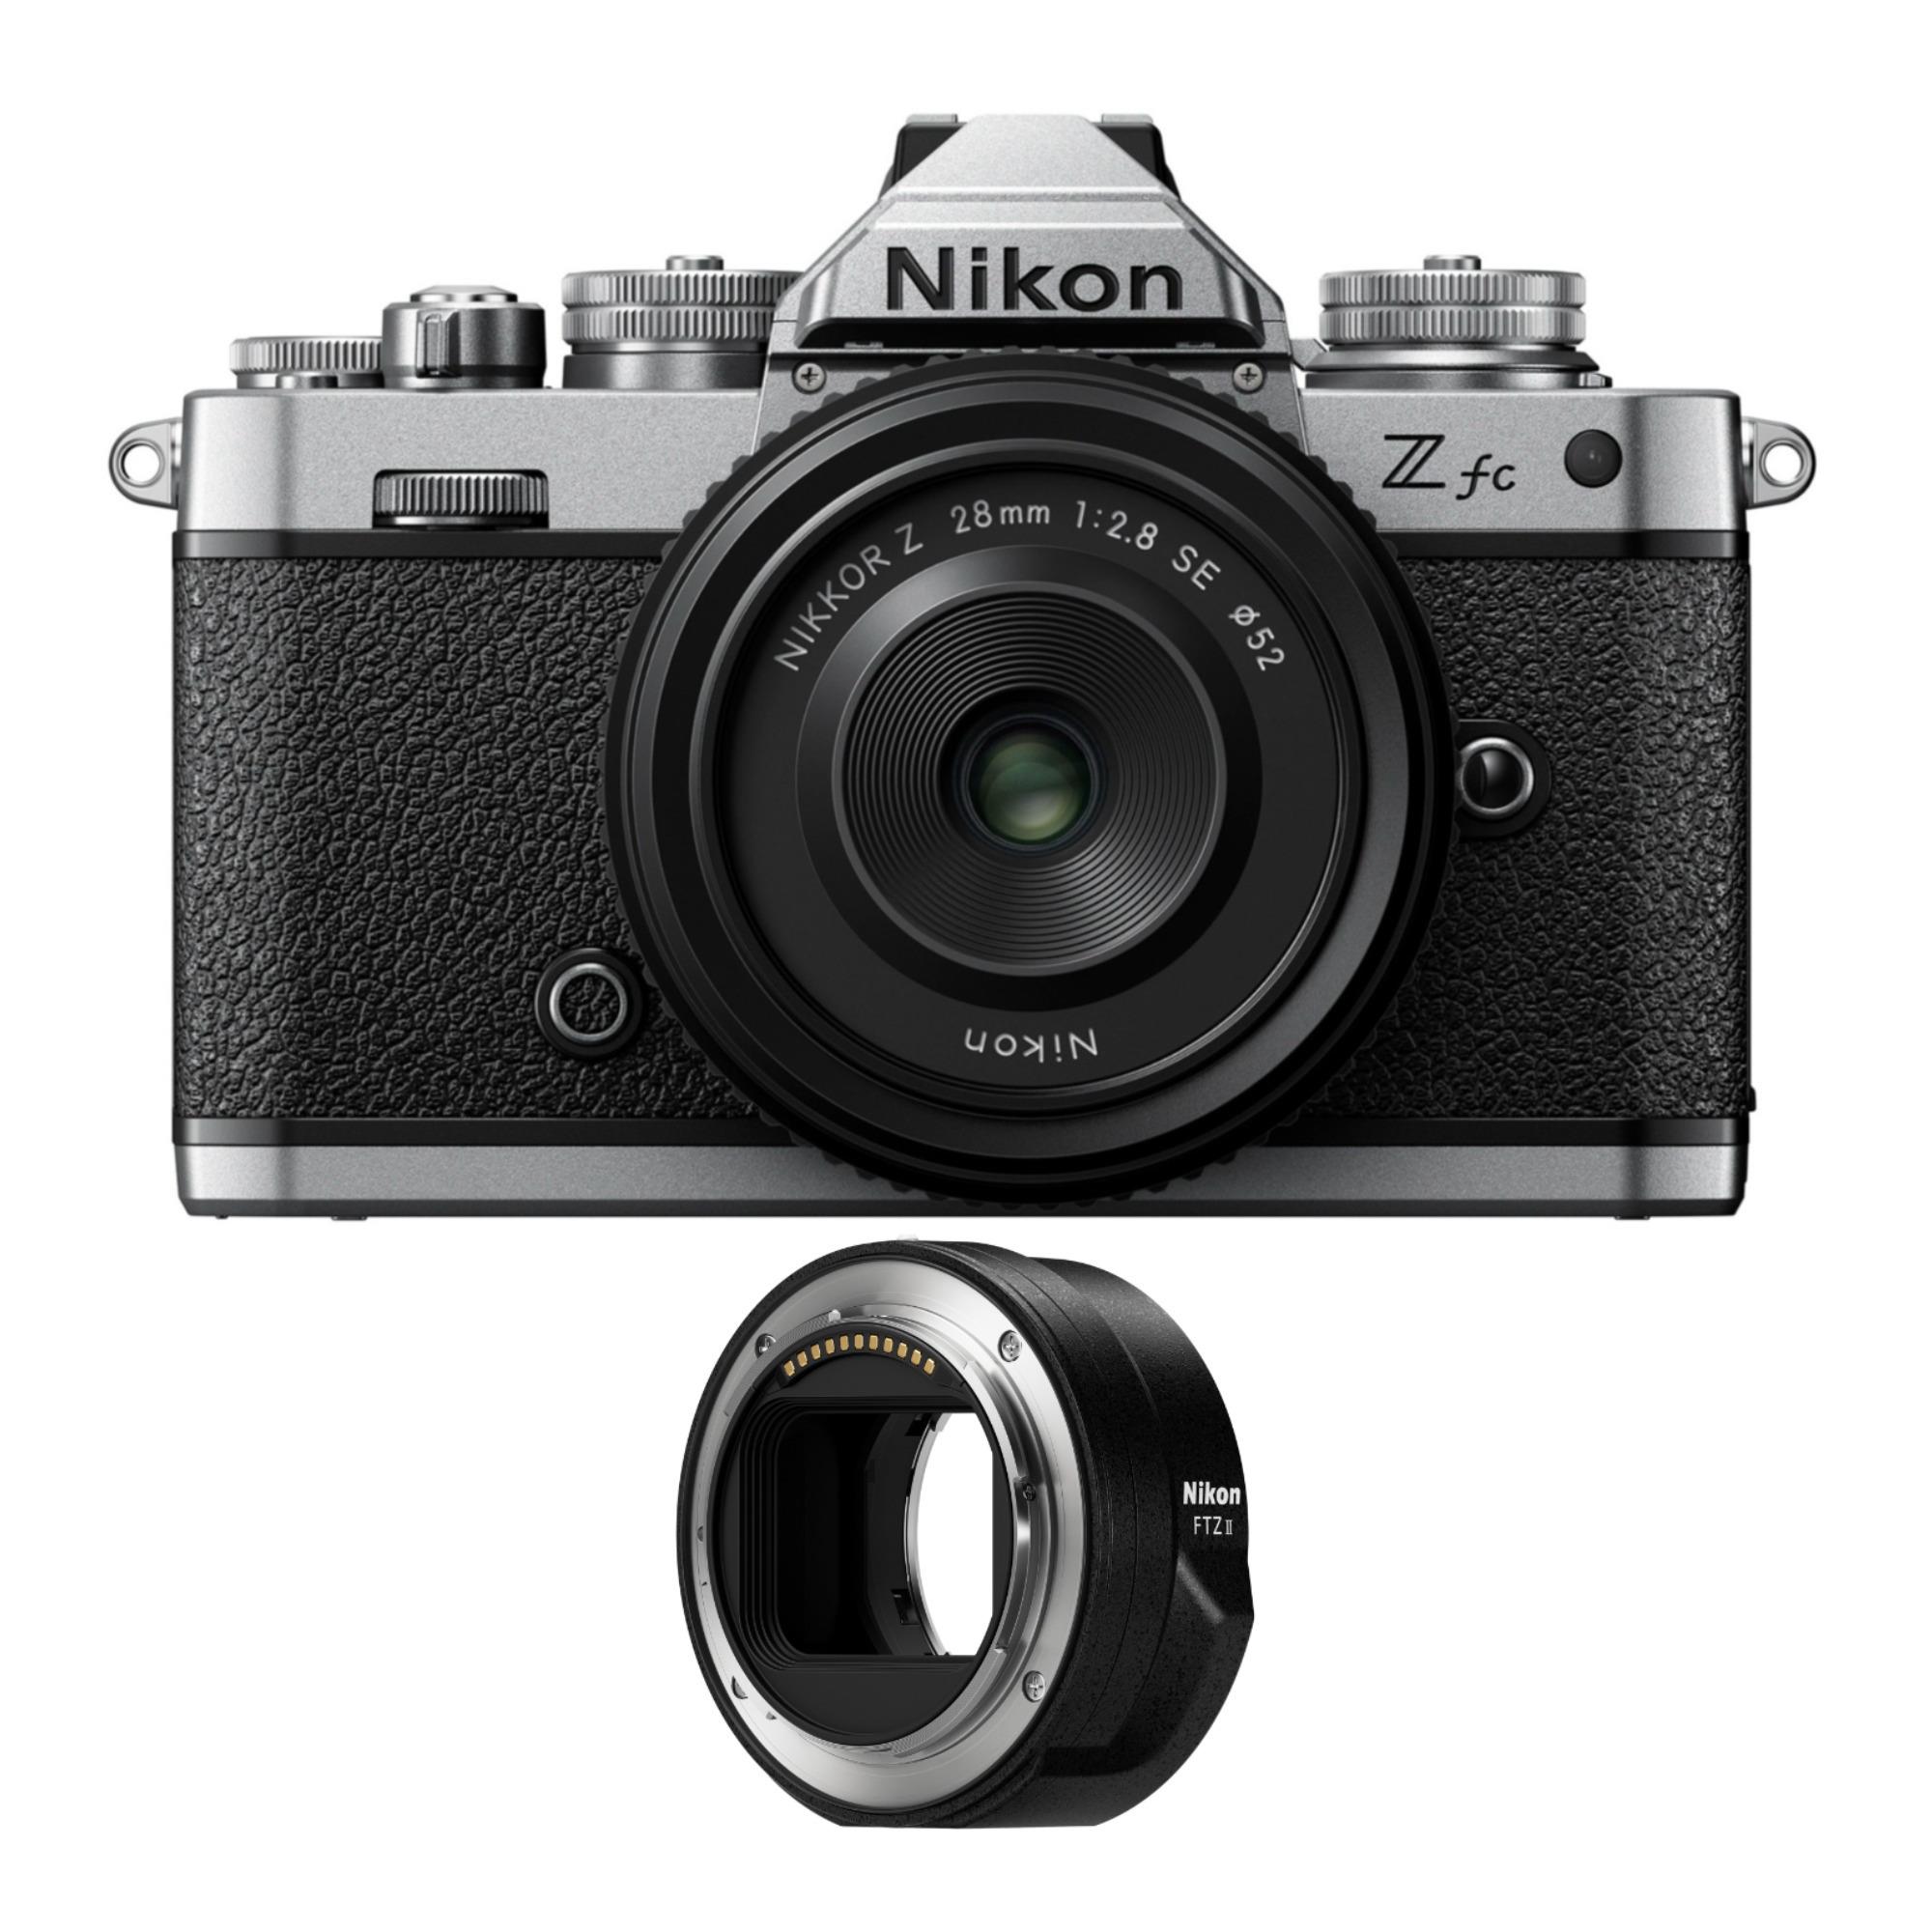 Nikon Zfc Mirrorless Camera with 28mm Lens and FTZ II Mount Adapter - image 1 of 11